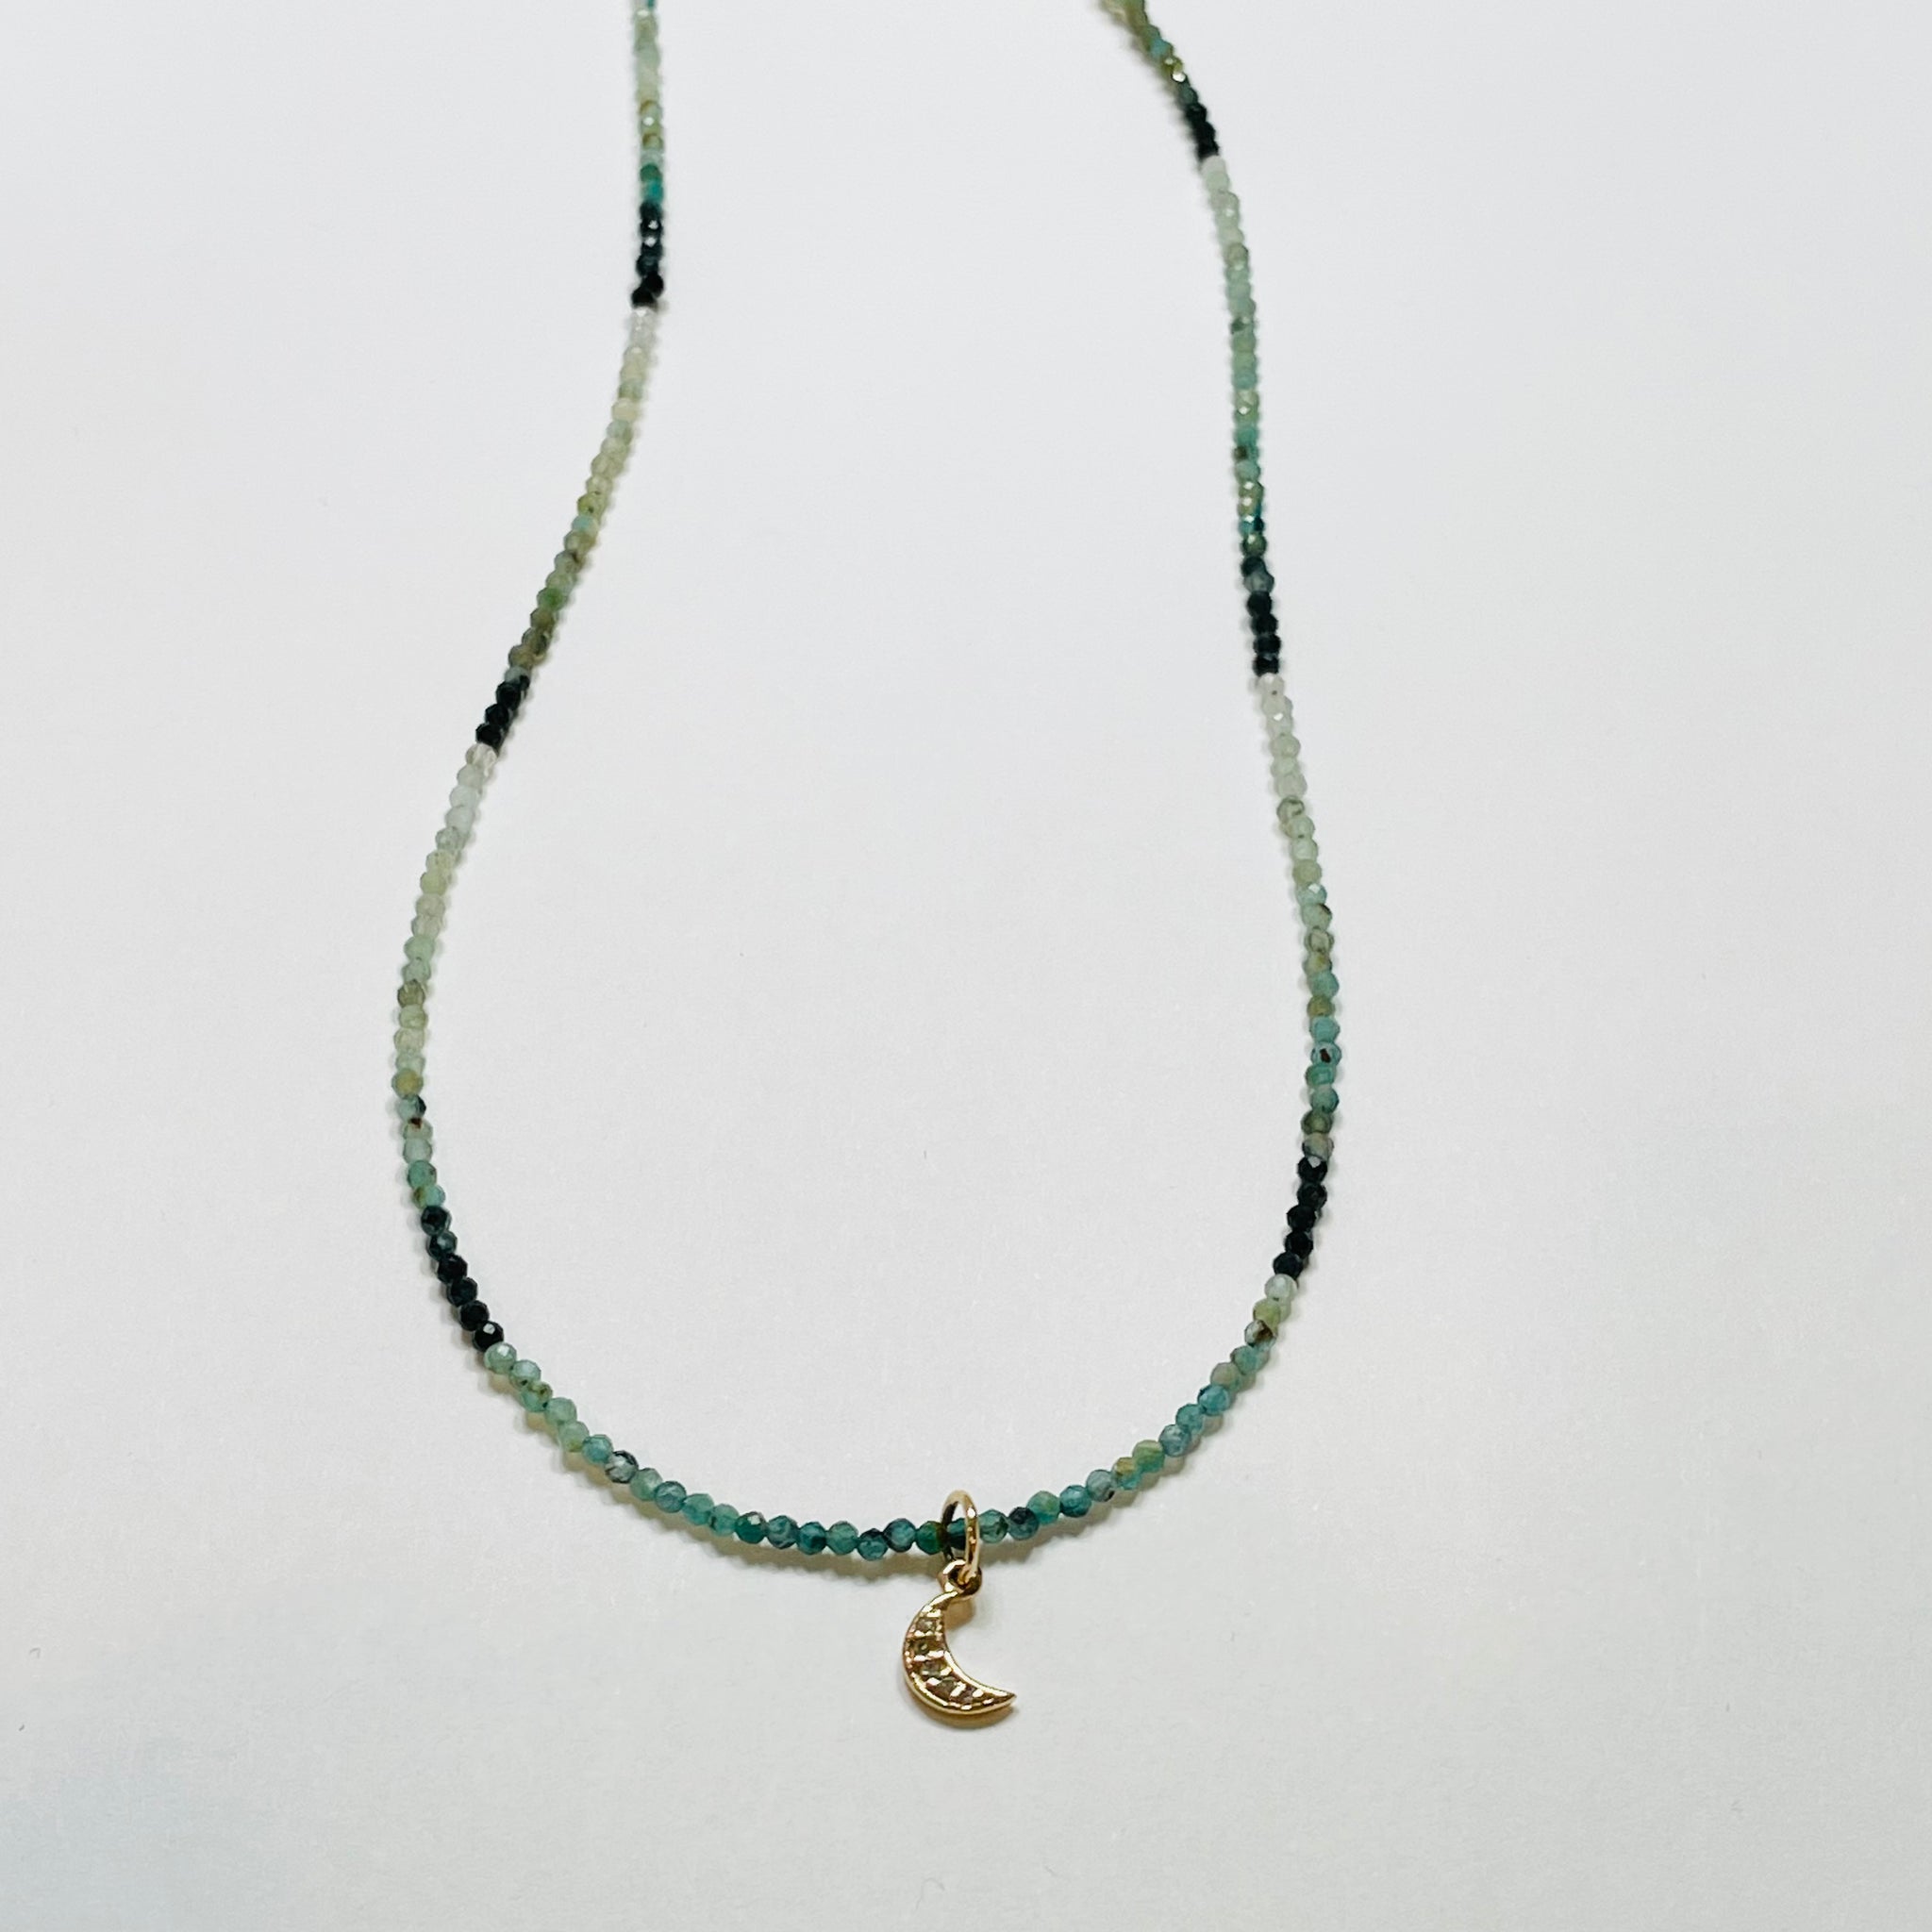 delicate tourmaline necklace with moon charm